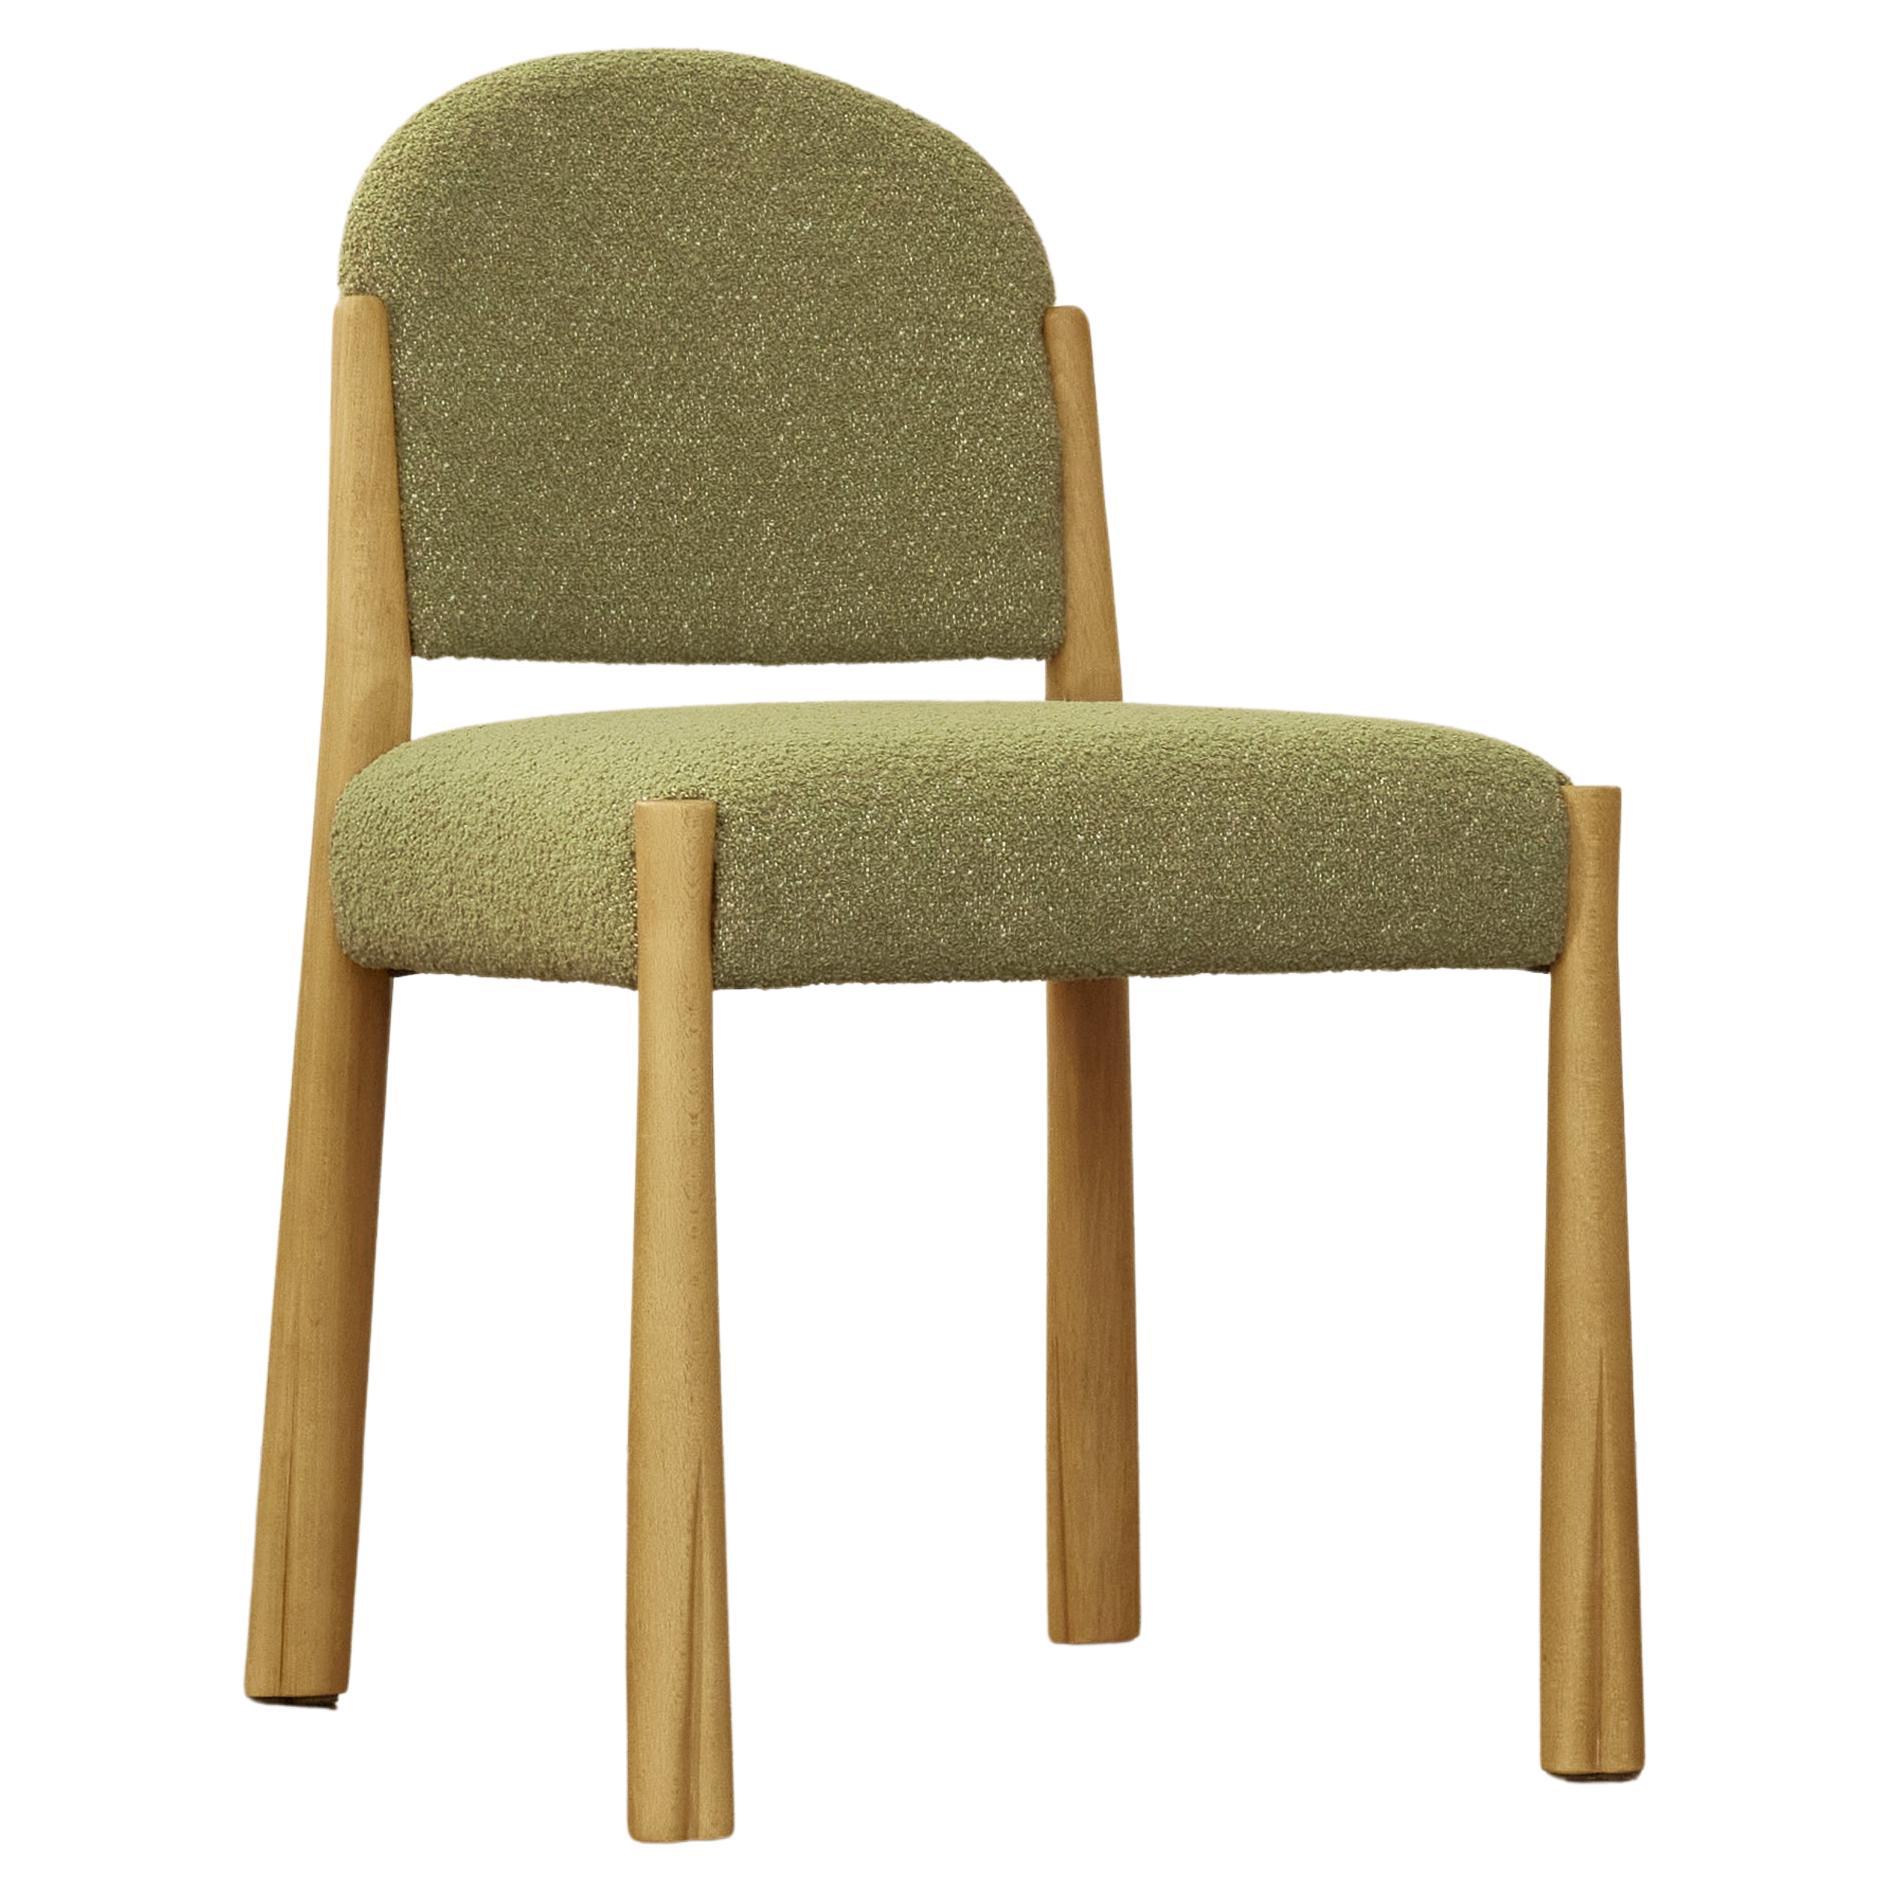 The Kudo Dining Chair